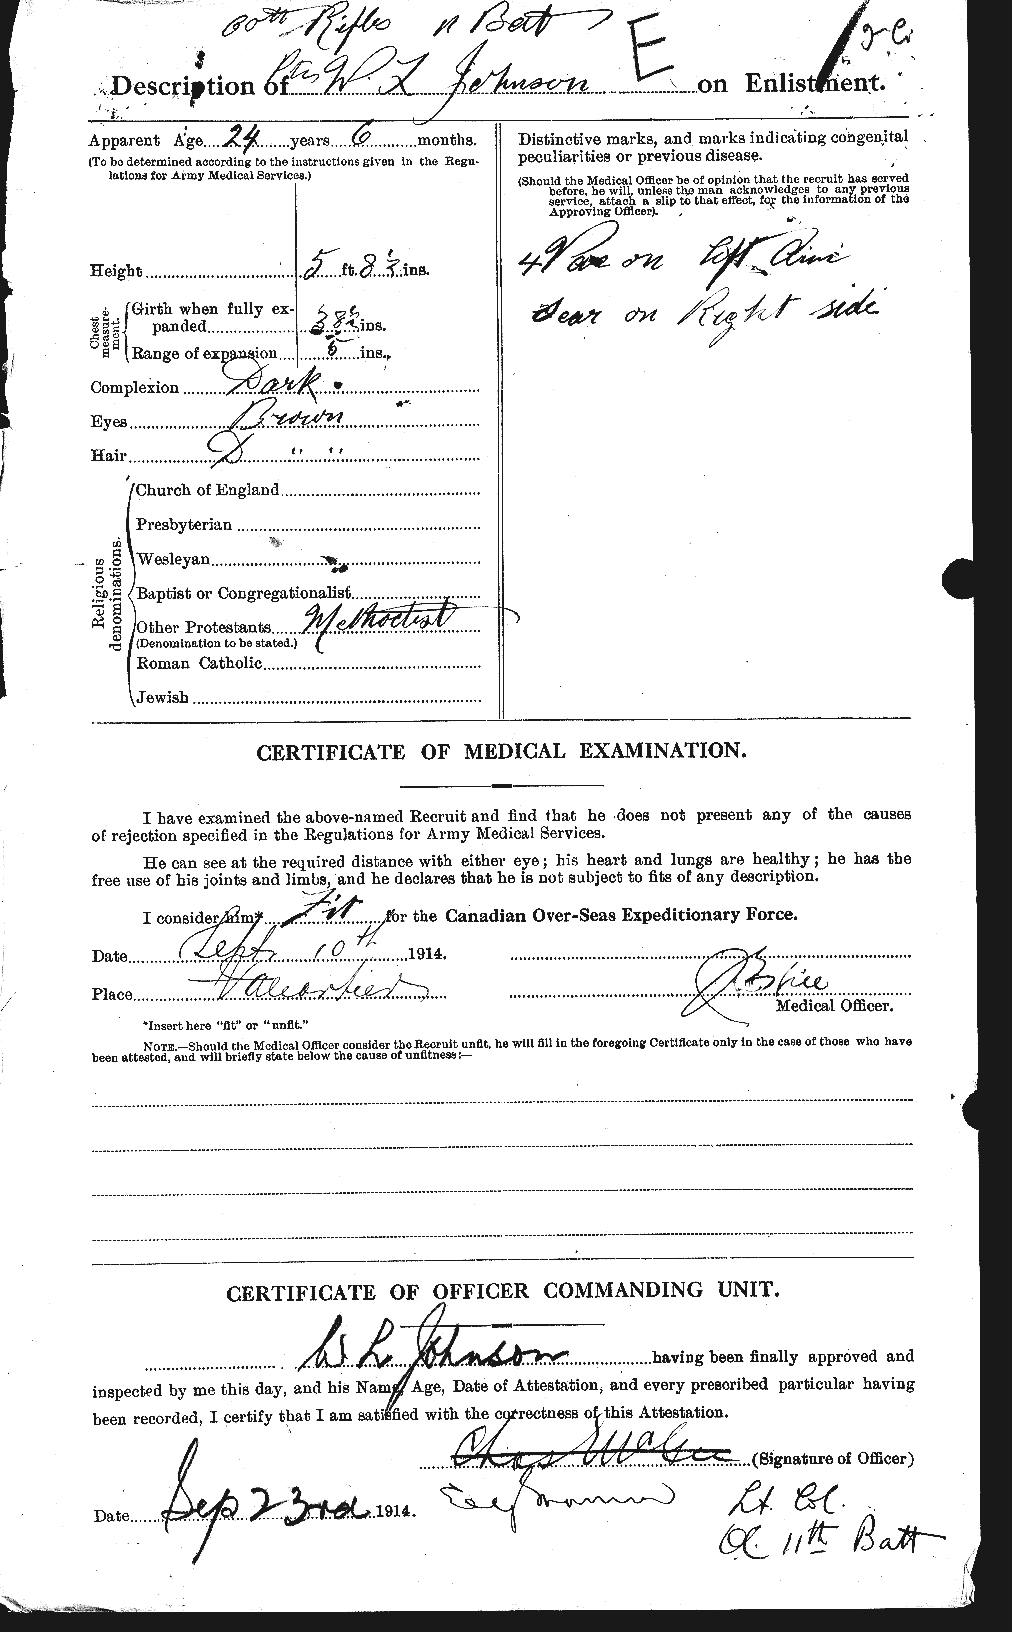 Personnel Records of the First World War - CEF 429597b